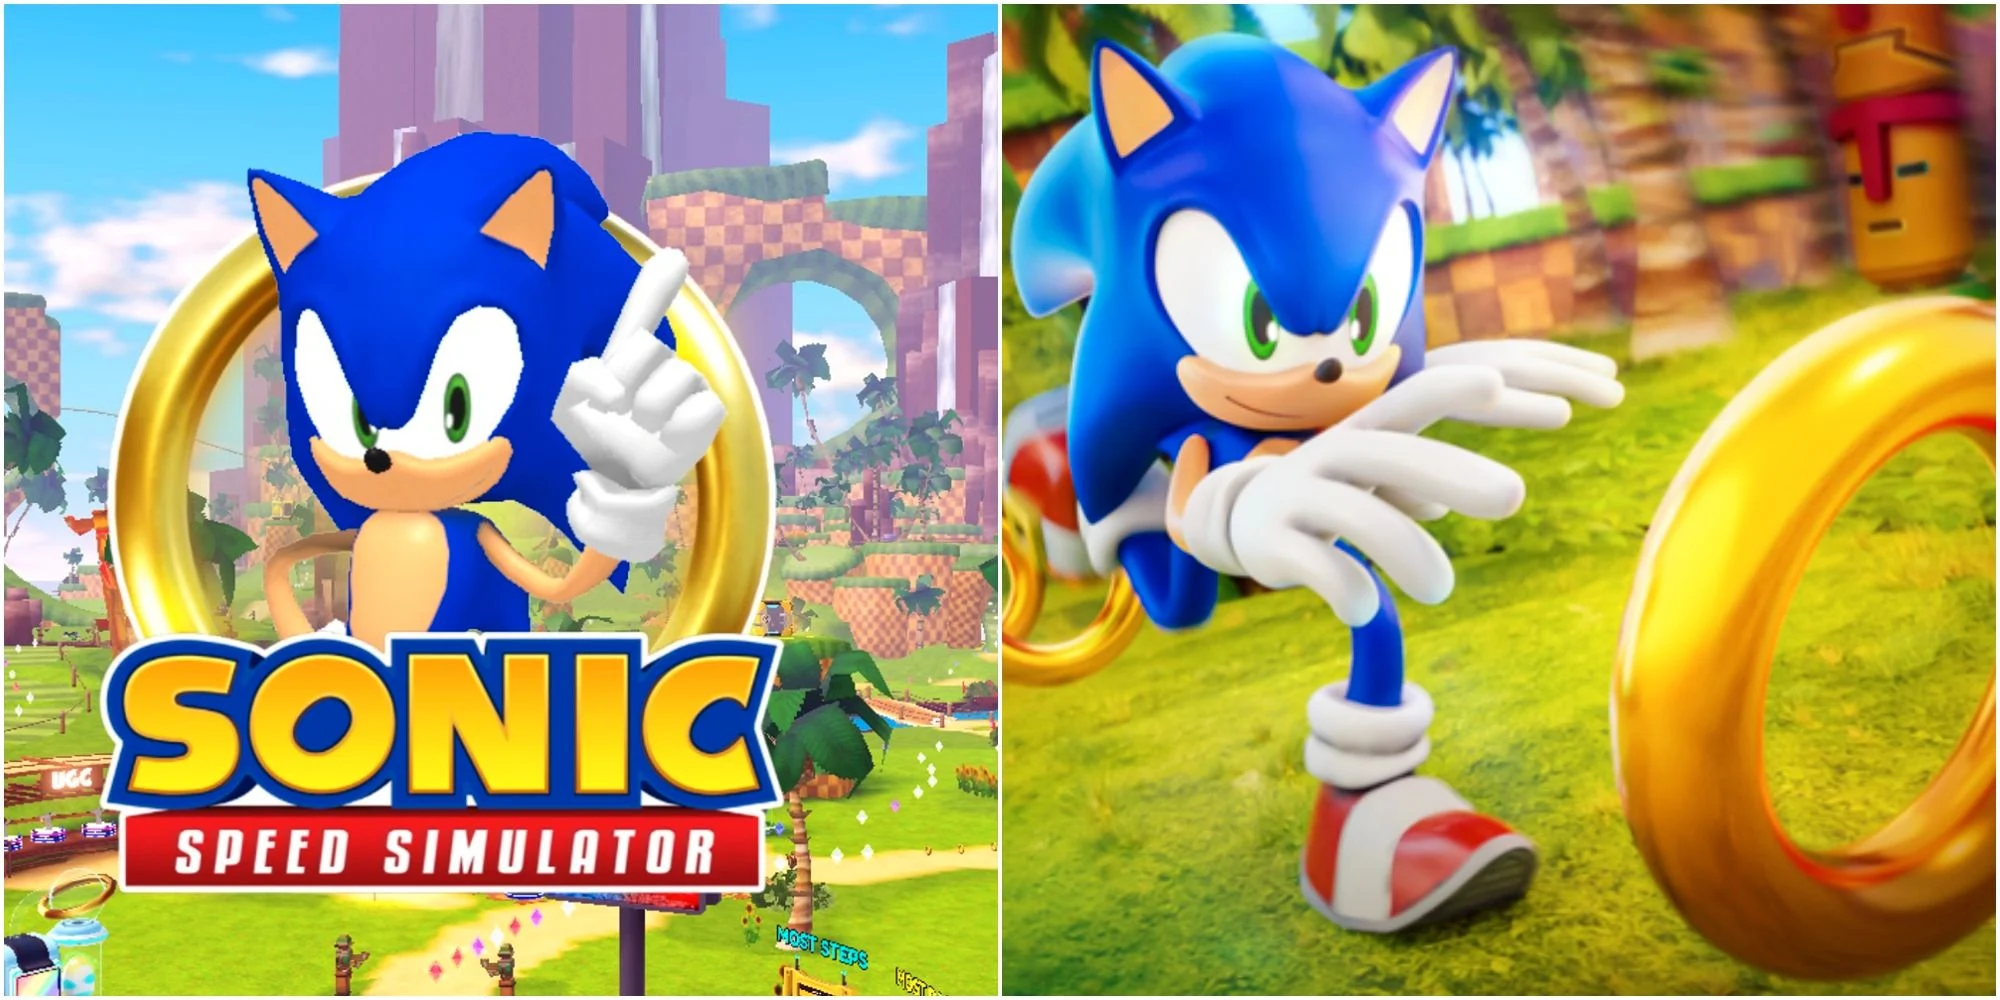 Sonic the Hedgehog Brings a Speed Simulator to Roblox